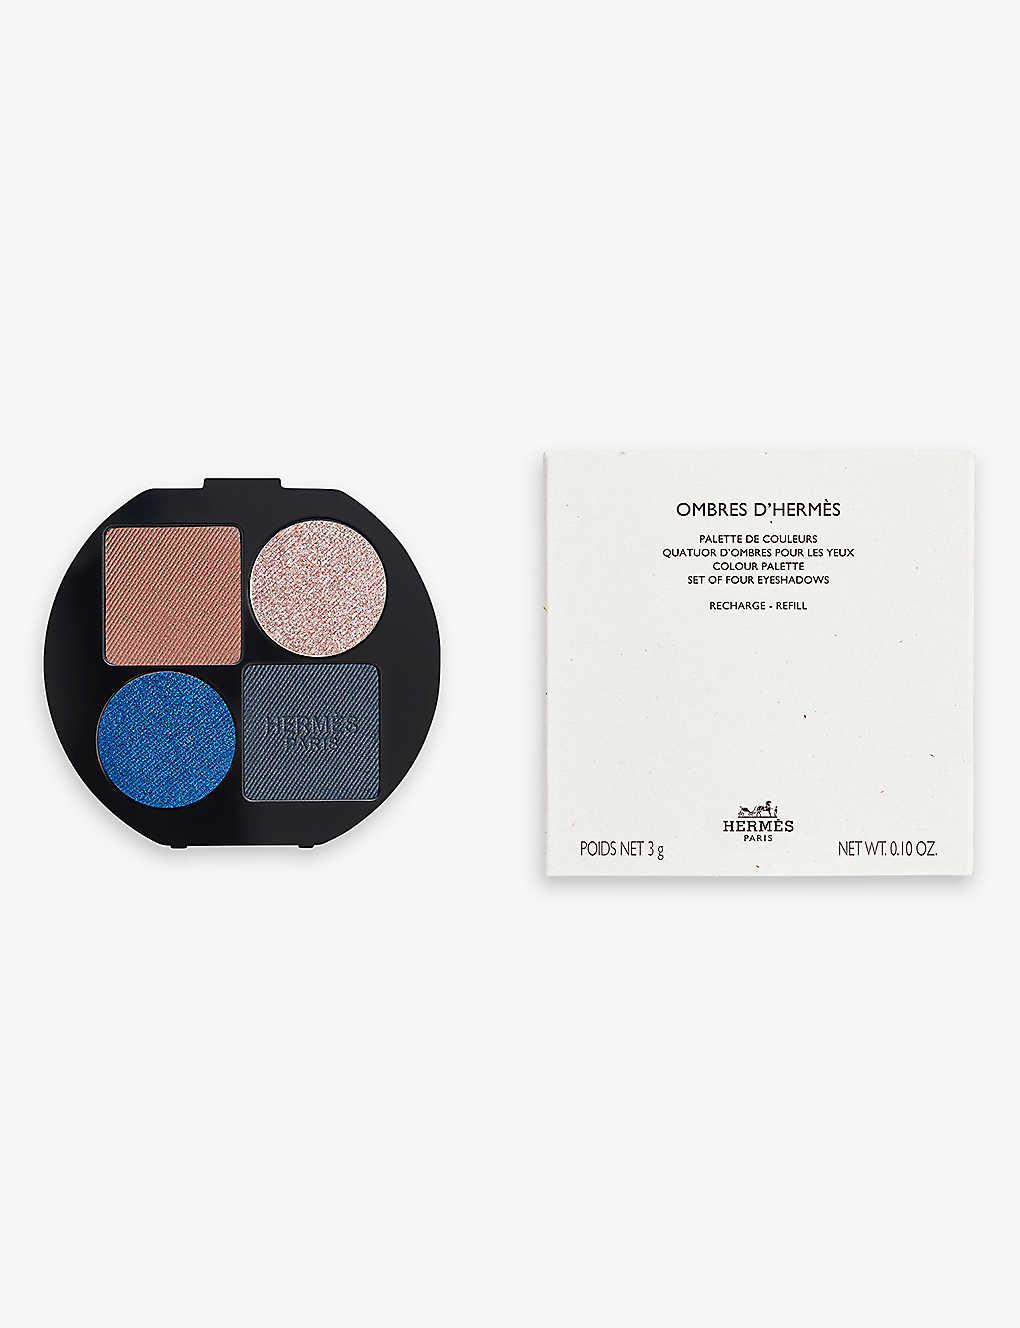 Hermes Ombres D'hermès Eyeshadow Palette Refill 3g In 04 Ombres Marines